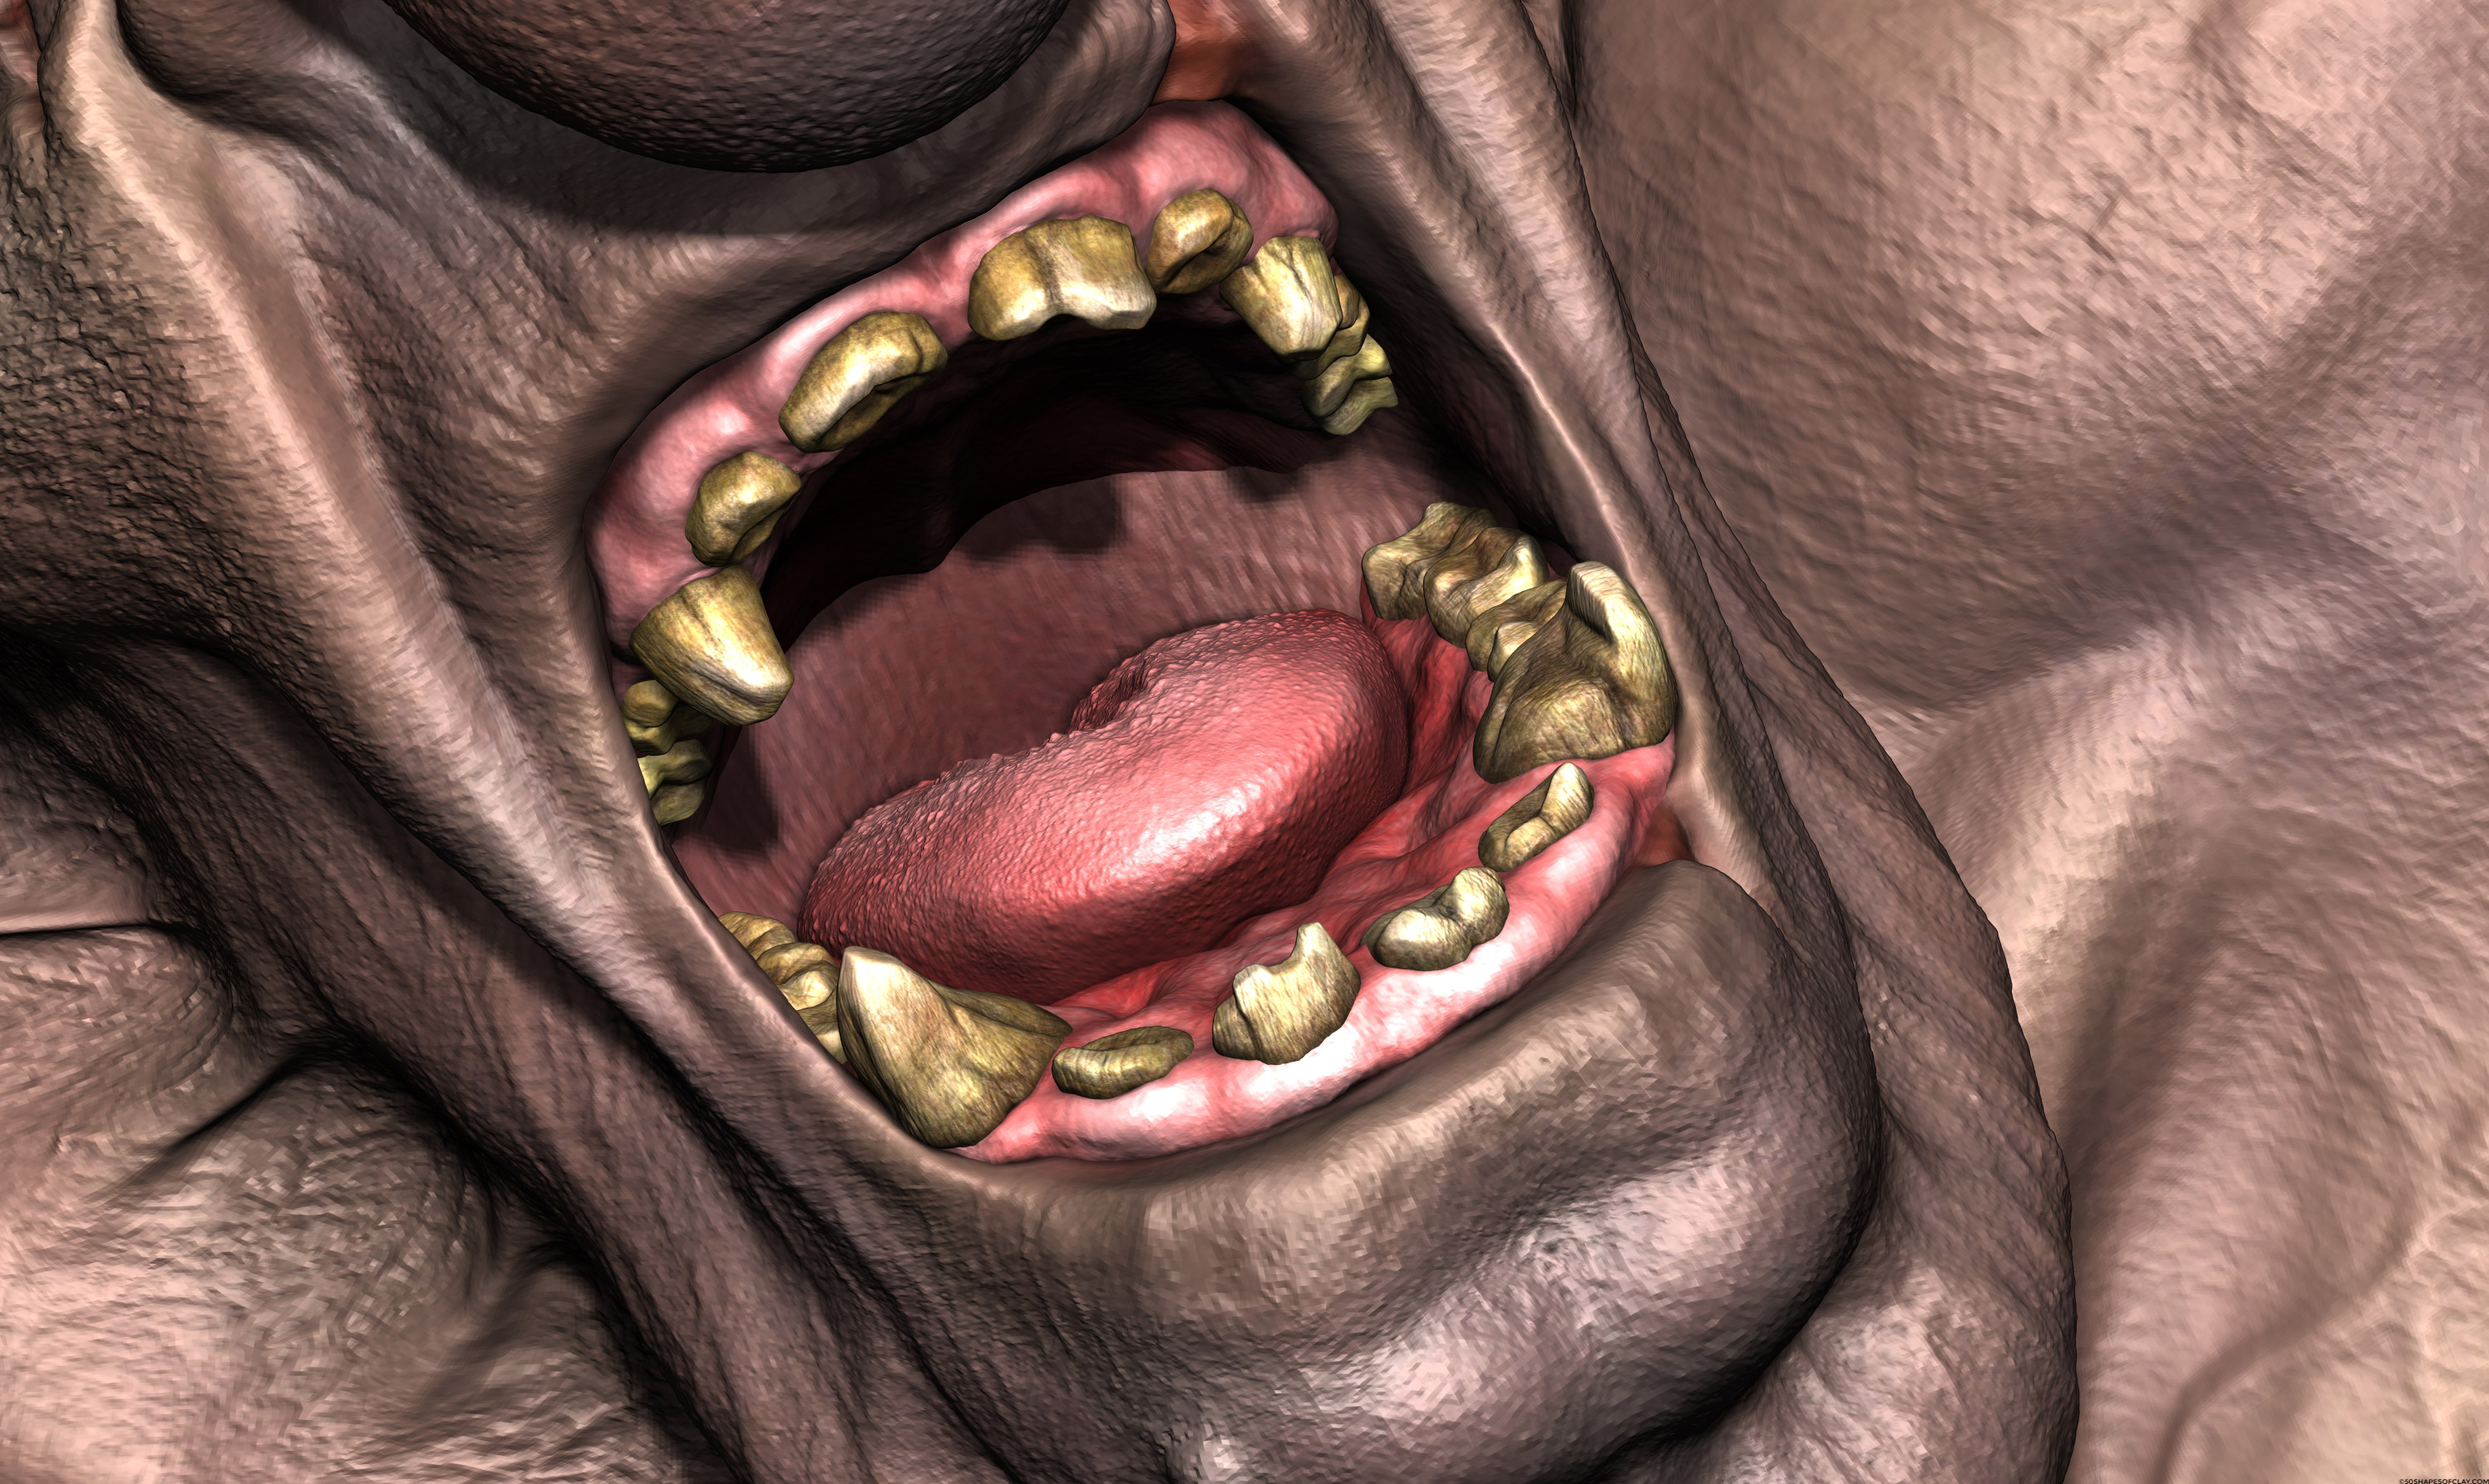 MOUTH CAVE TROLL